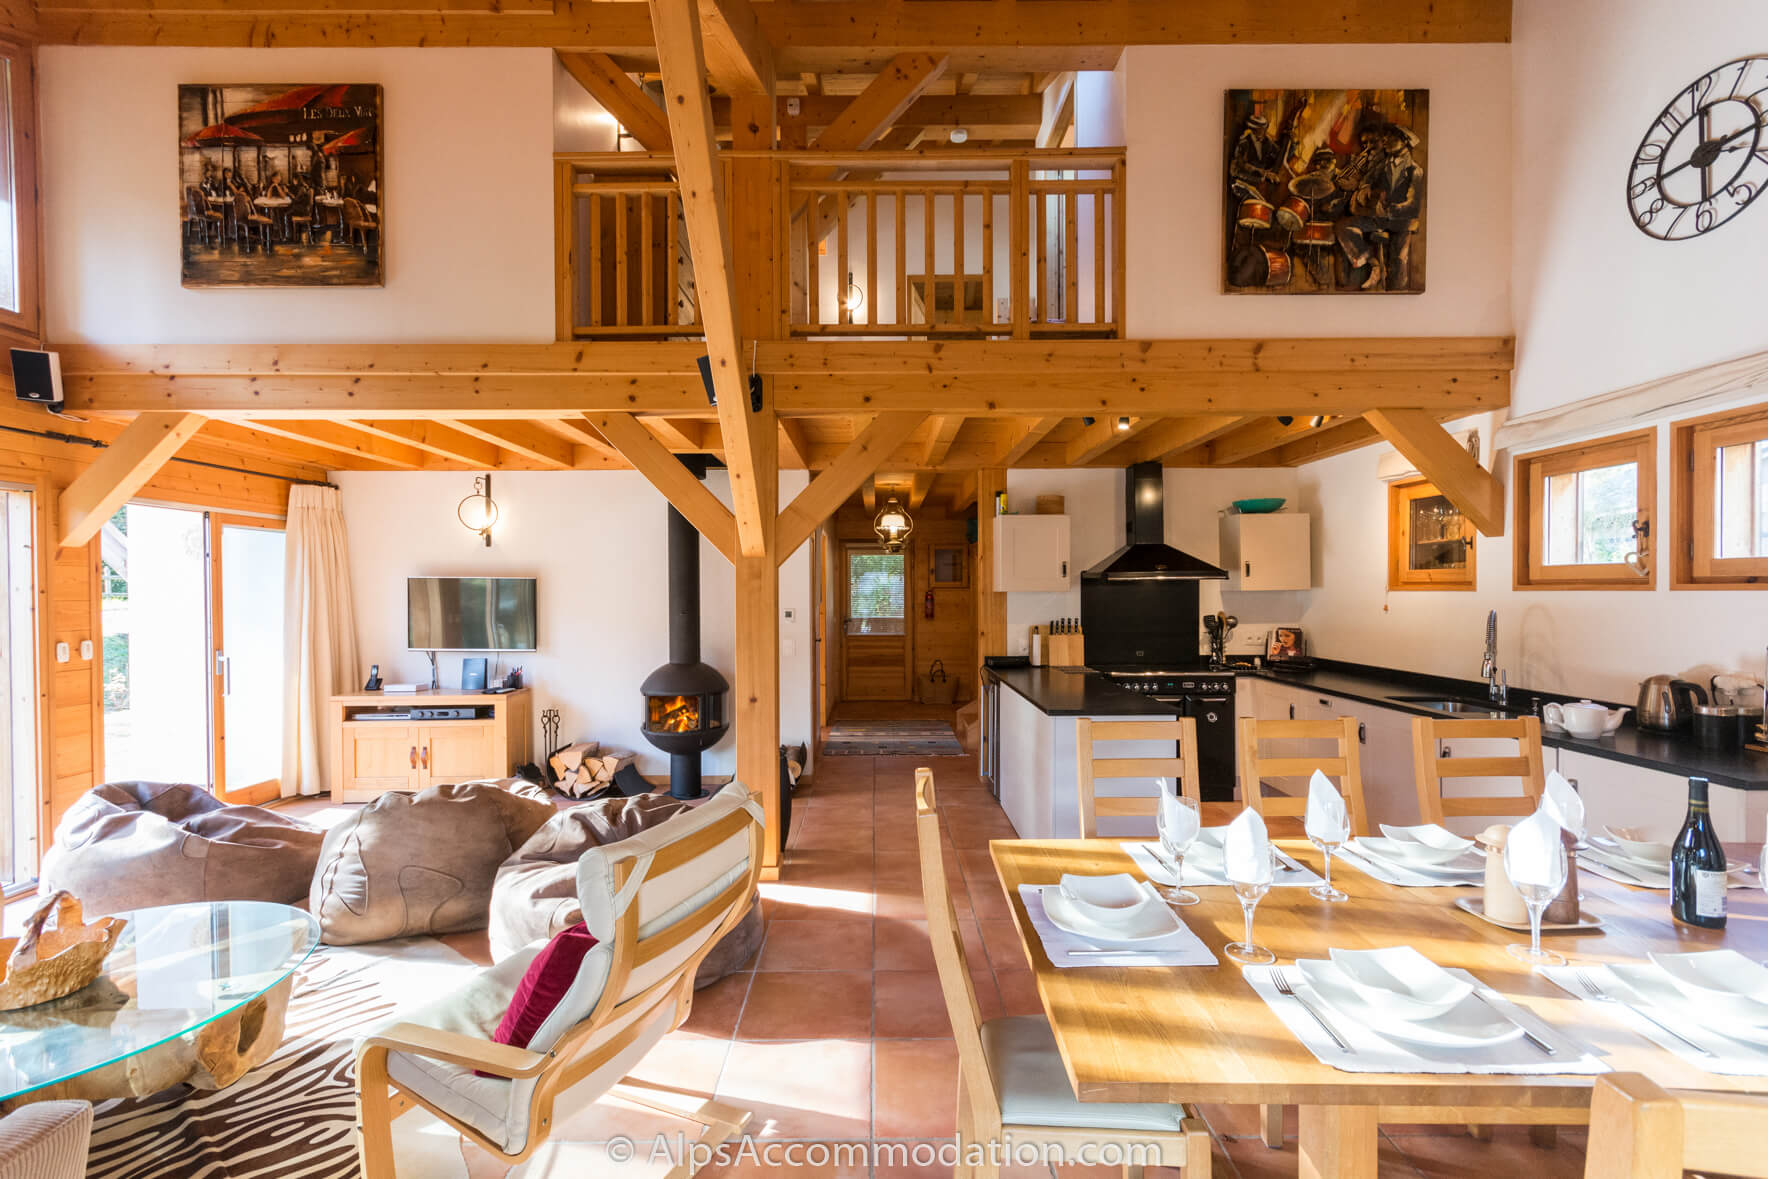 Chalet La Boissière Samoëns - A great area for families and groups to enjoy